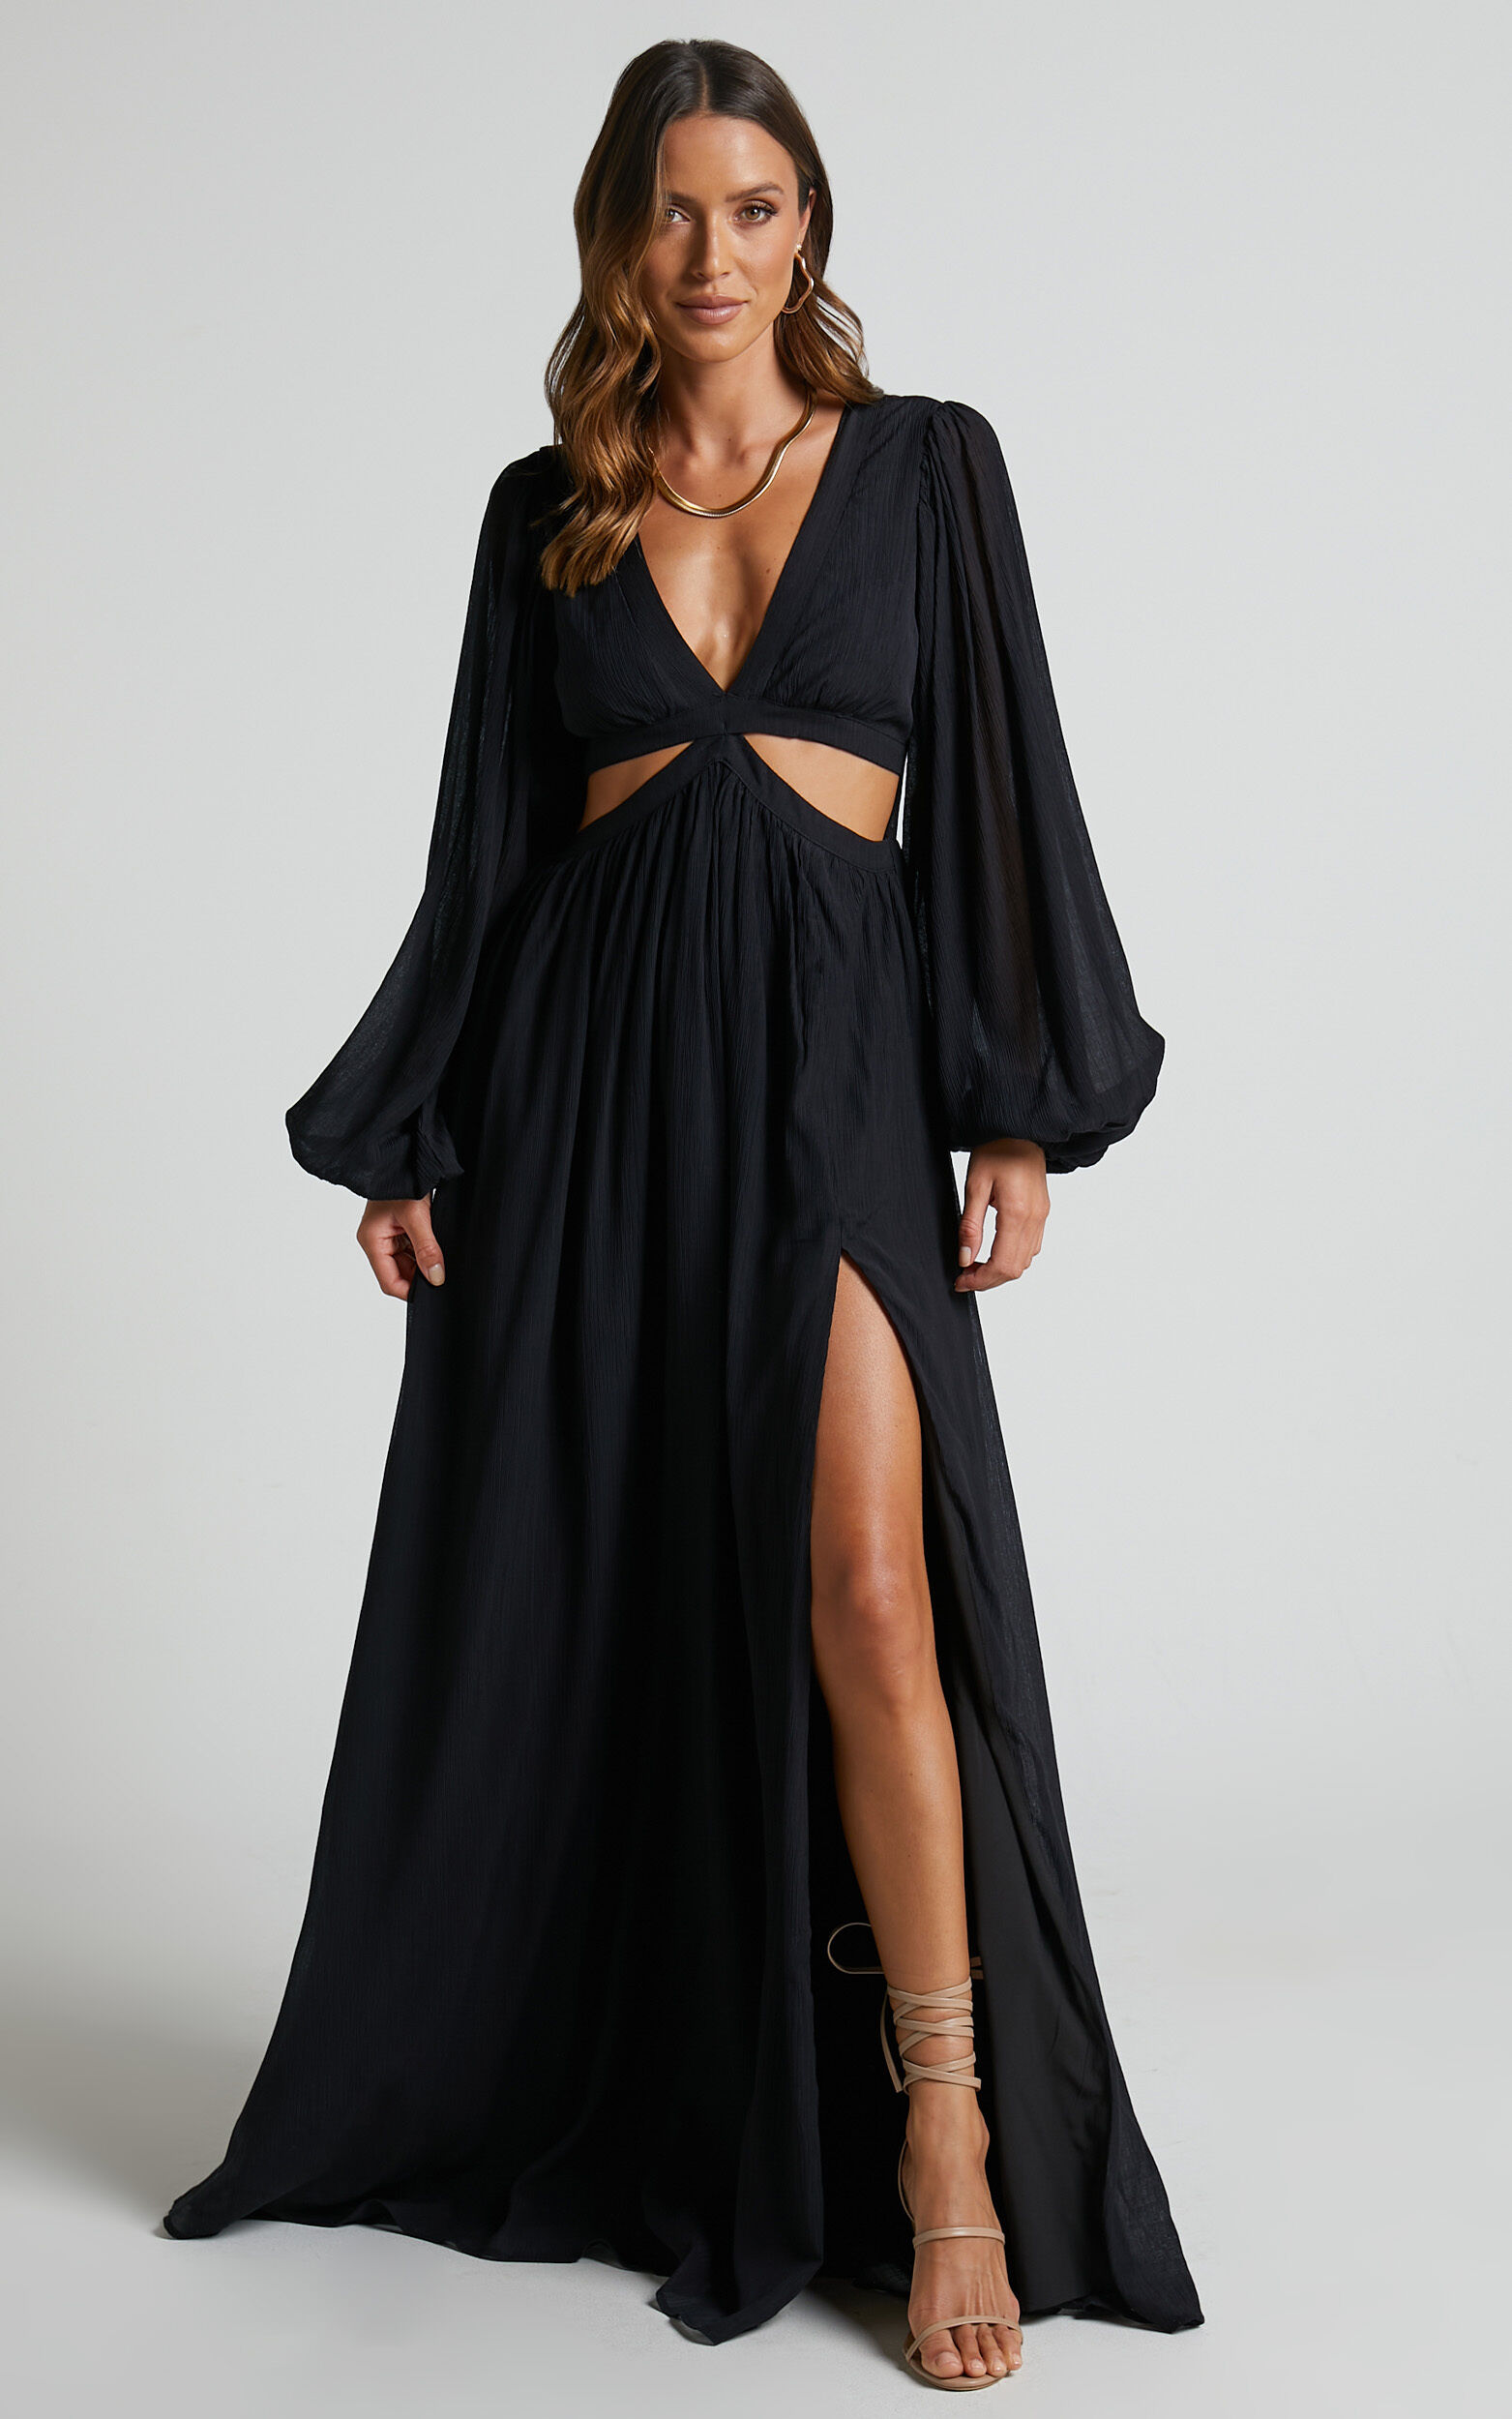 Black Silk Maxi Dress With Long Sleeves and Side Slit, Black Silk